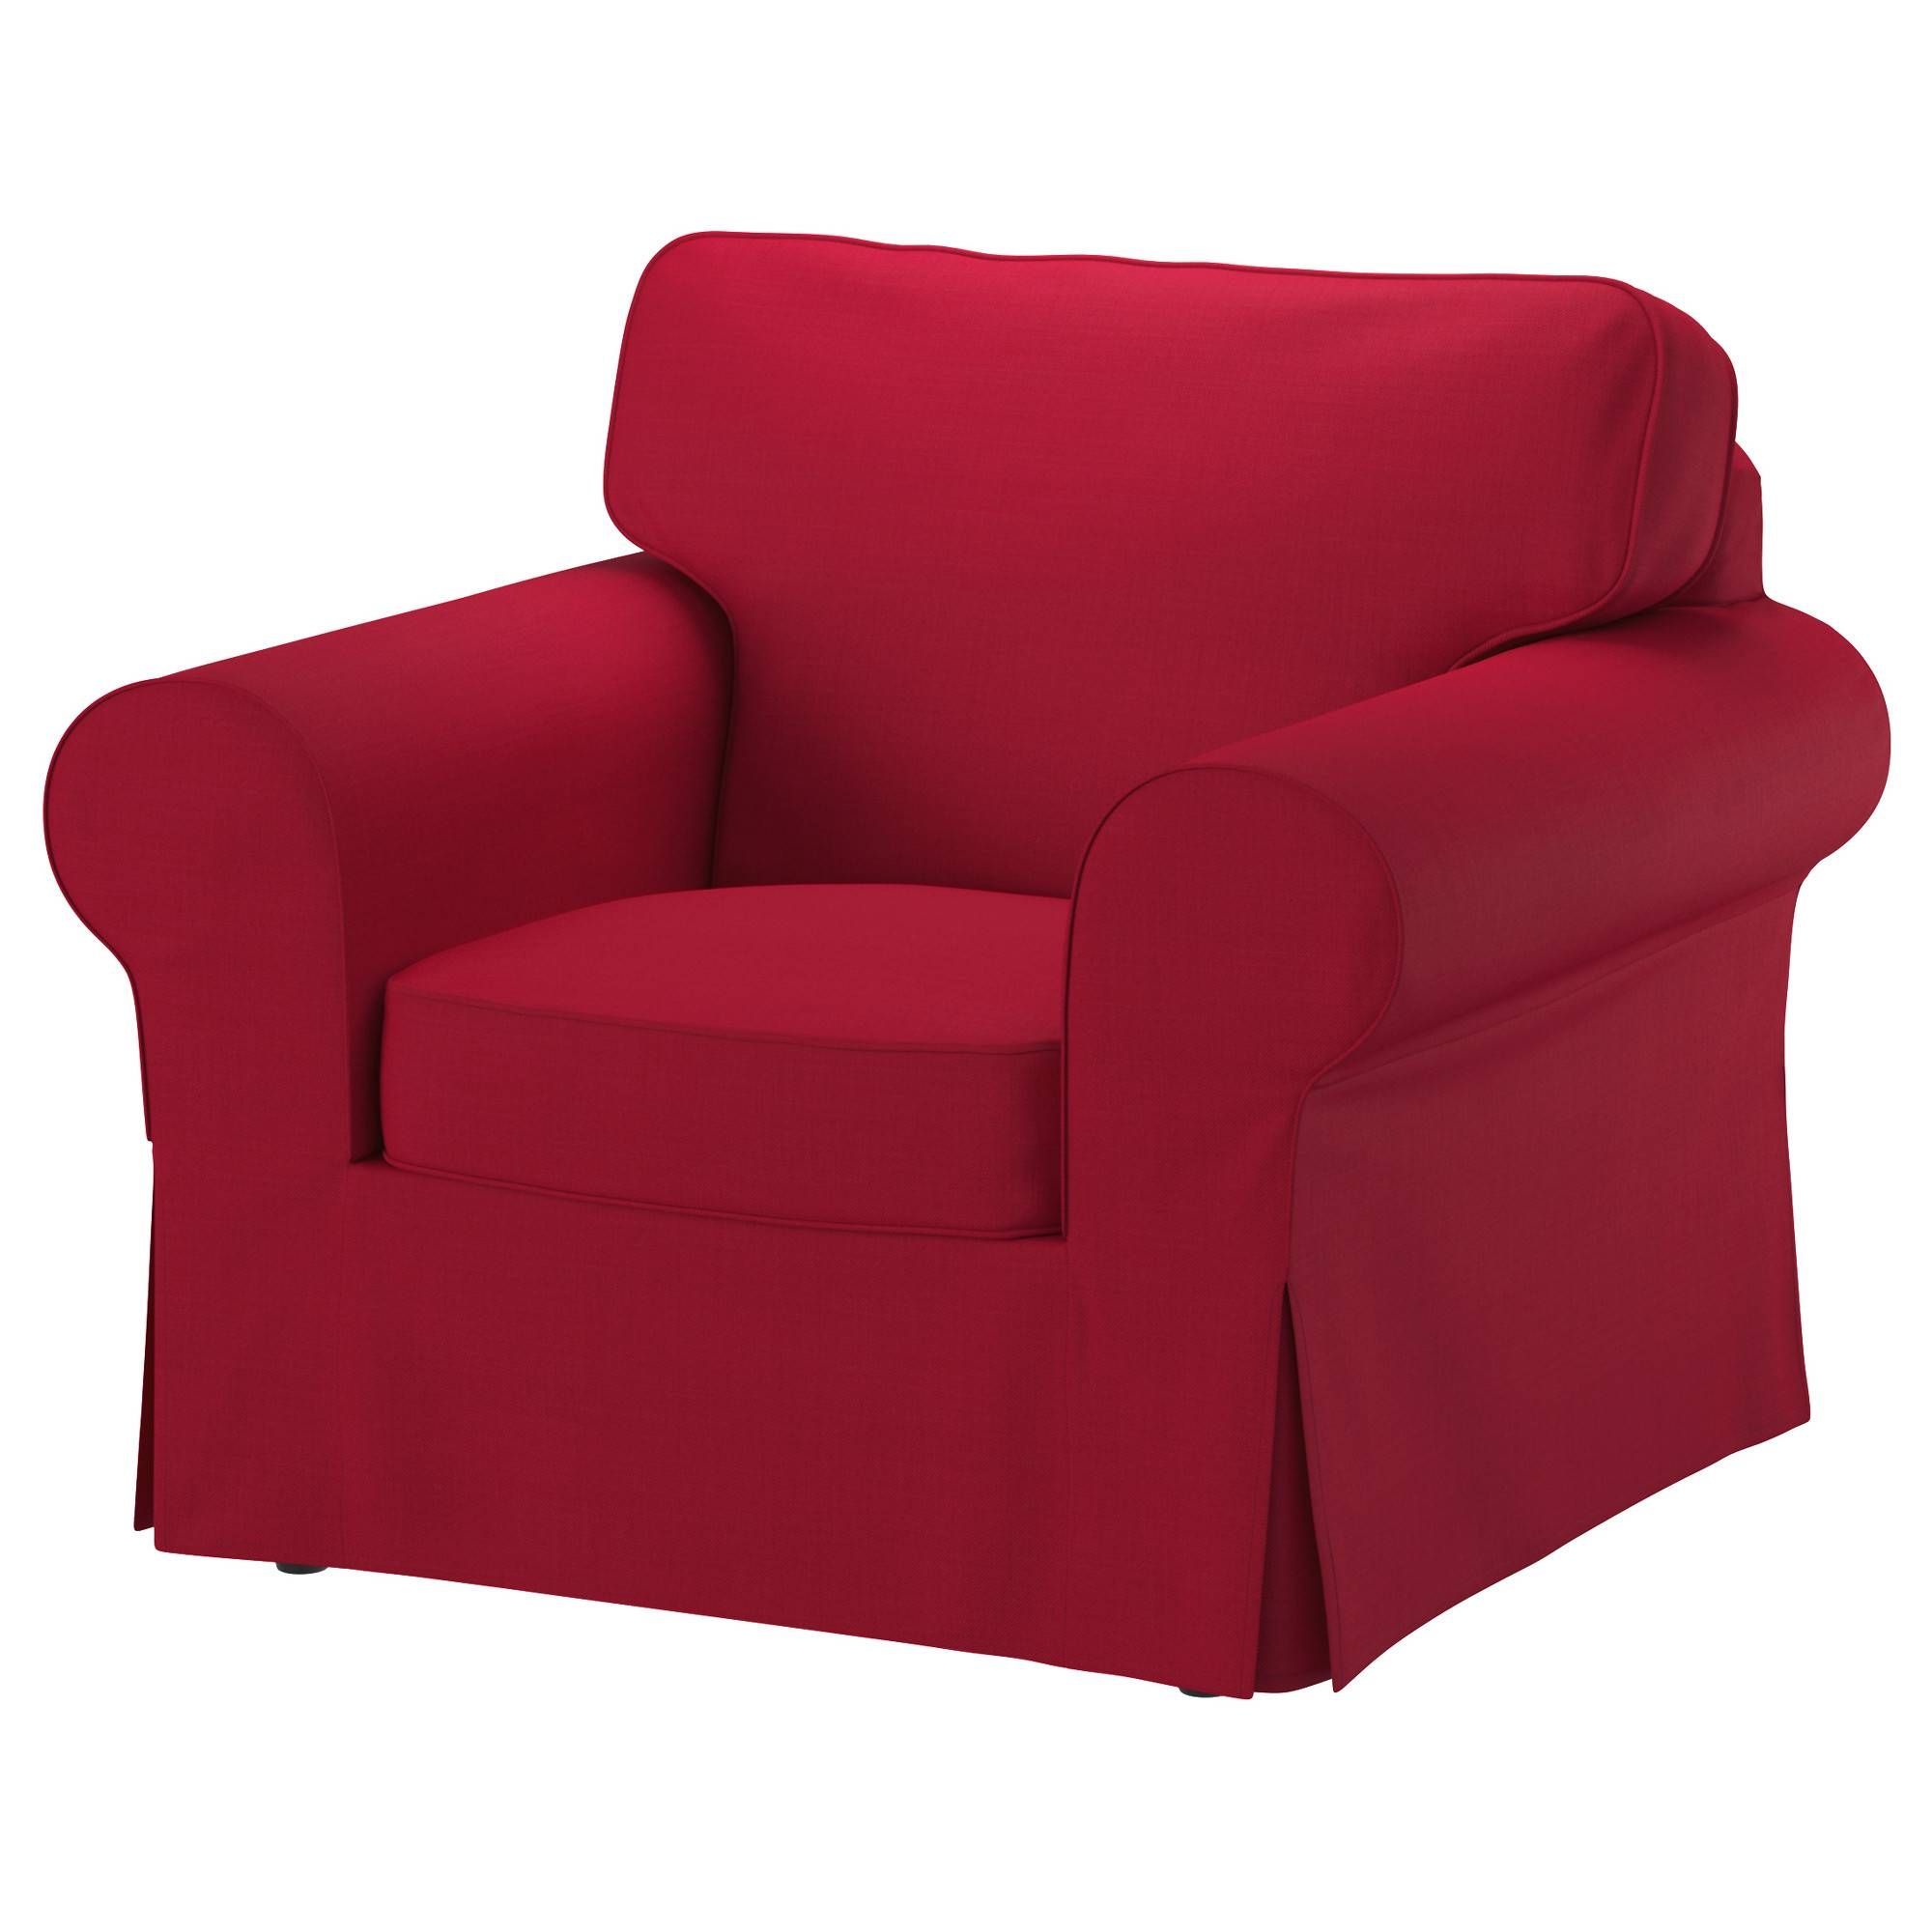 Furniture: Give Your Sofa Fresh New Look With Ikea Ektorp Chair Throughout Sofa Chairs Ikea (View 2 of 30)